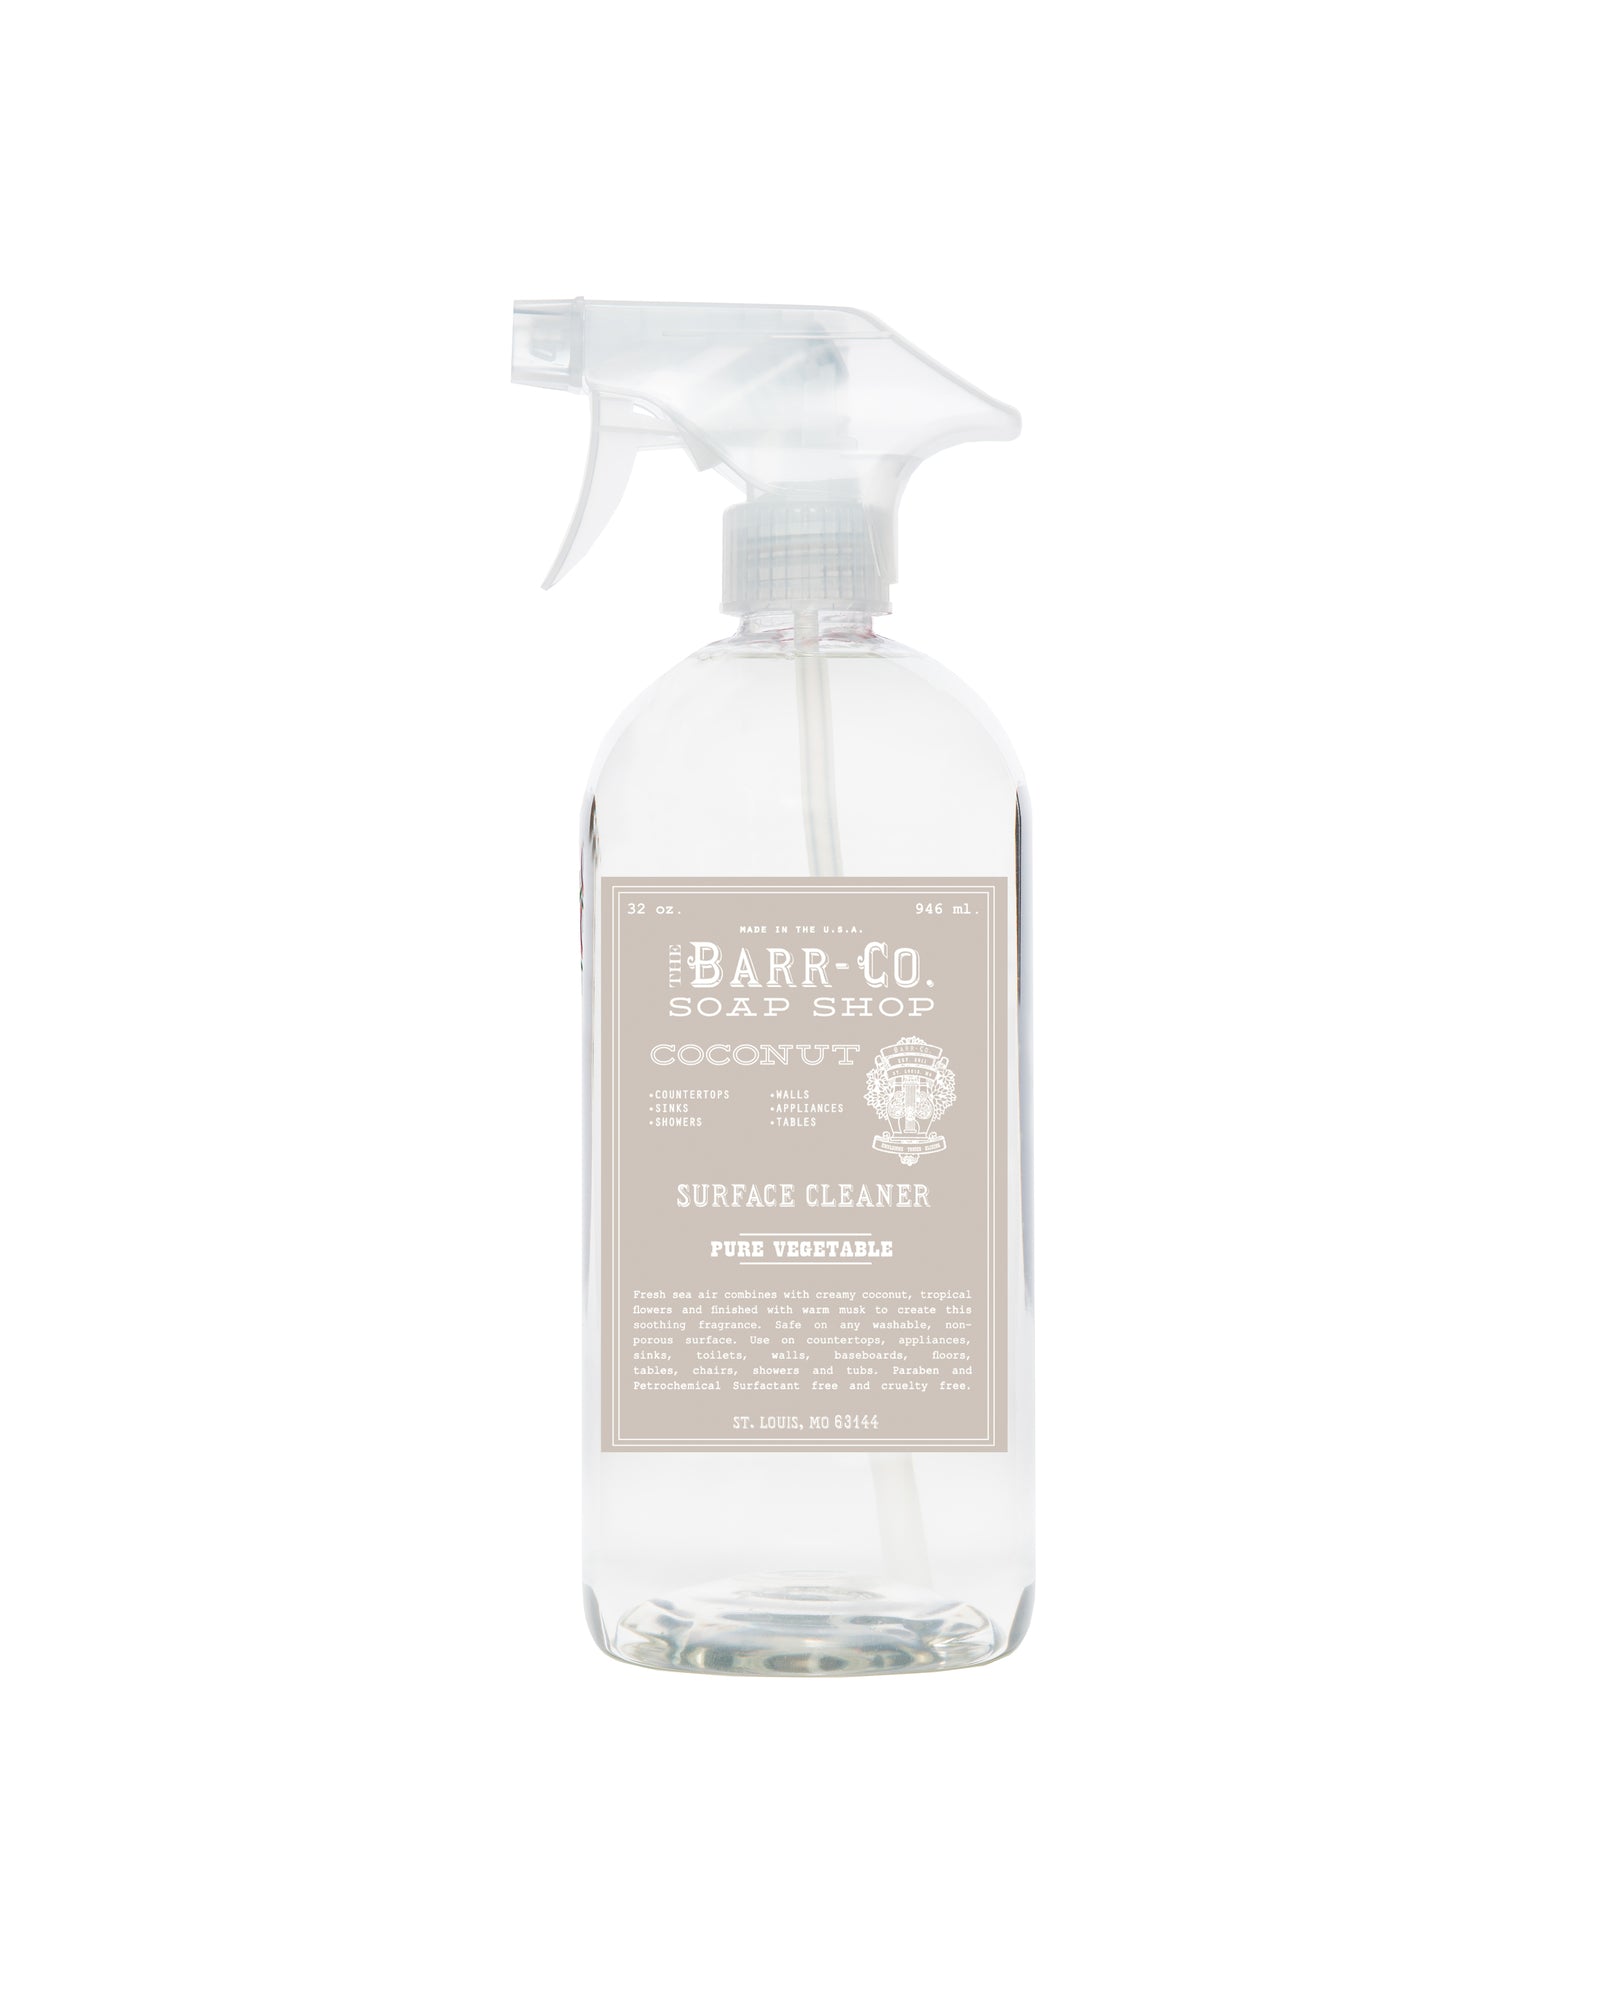 Barr-Co Coconut Surface Cleaner